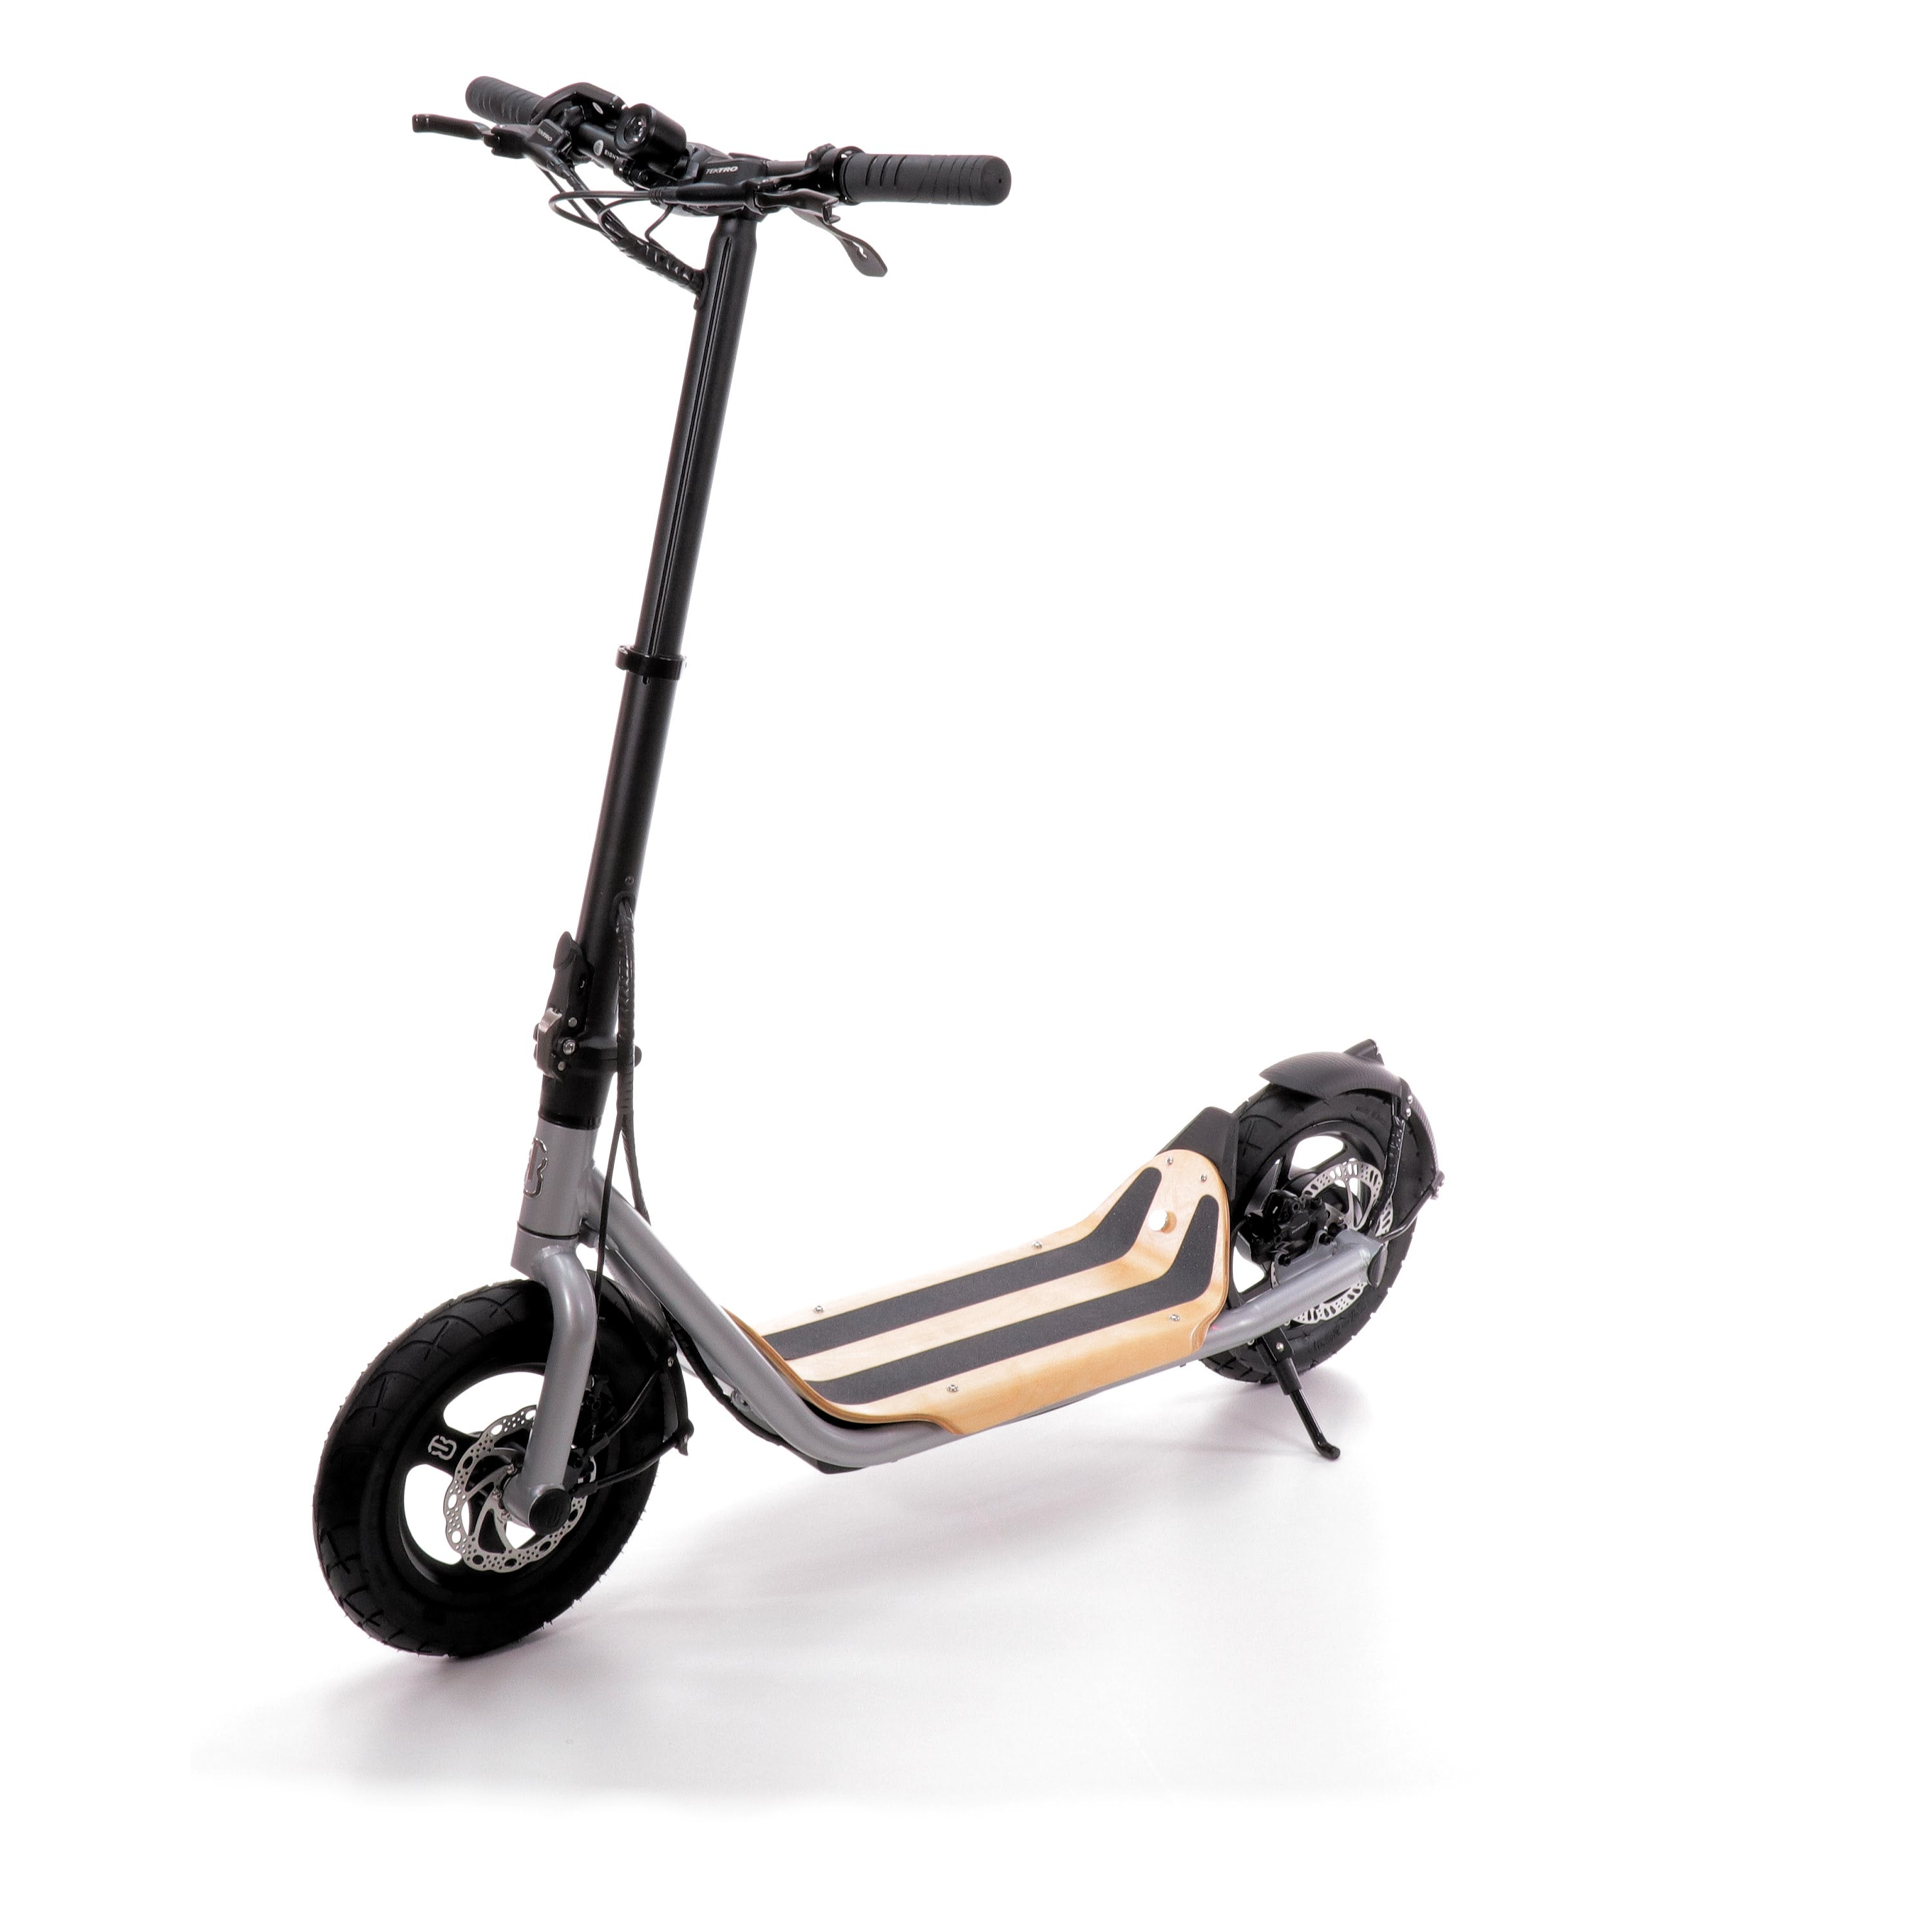 8TEV B12 Proxi Electric Scooter Commuter/City scooter 8TEV 250W-500W 15-25km Silver